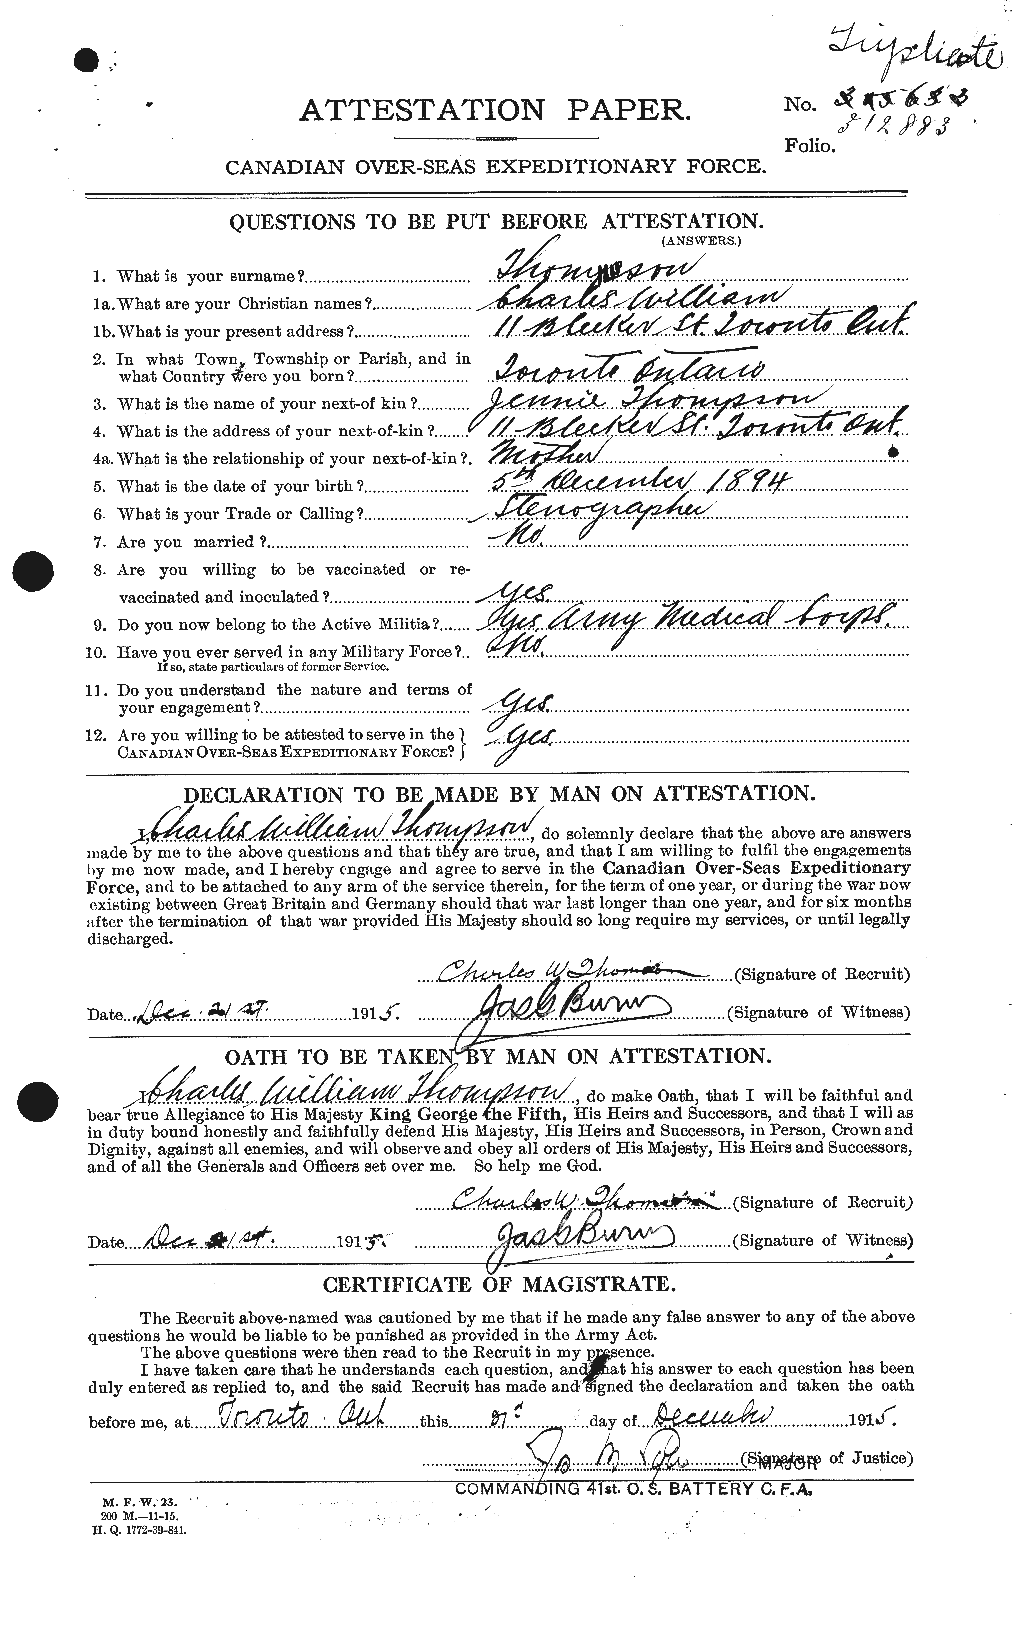 Personnel Records of the First World War - CEF 632309a